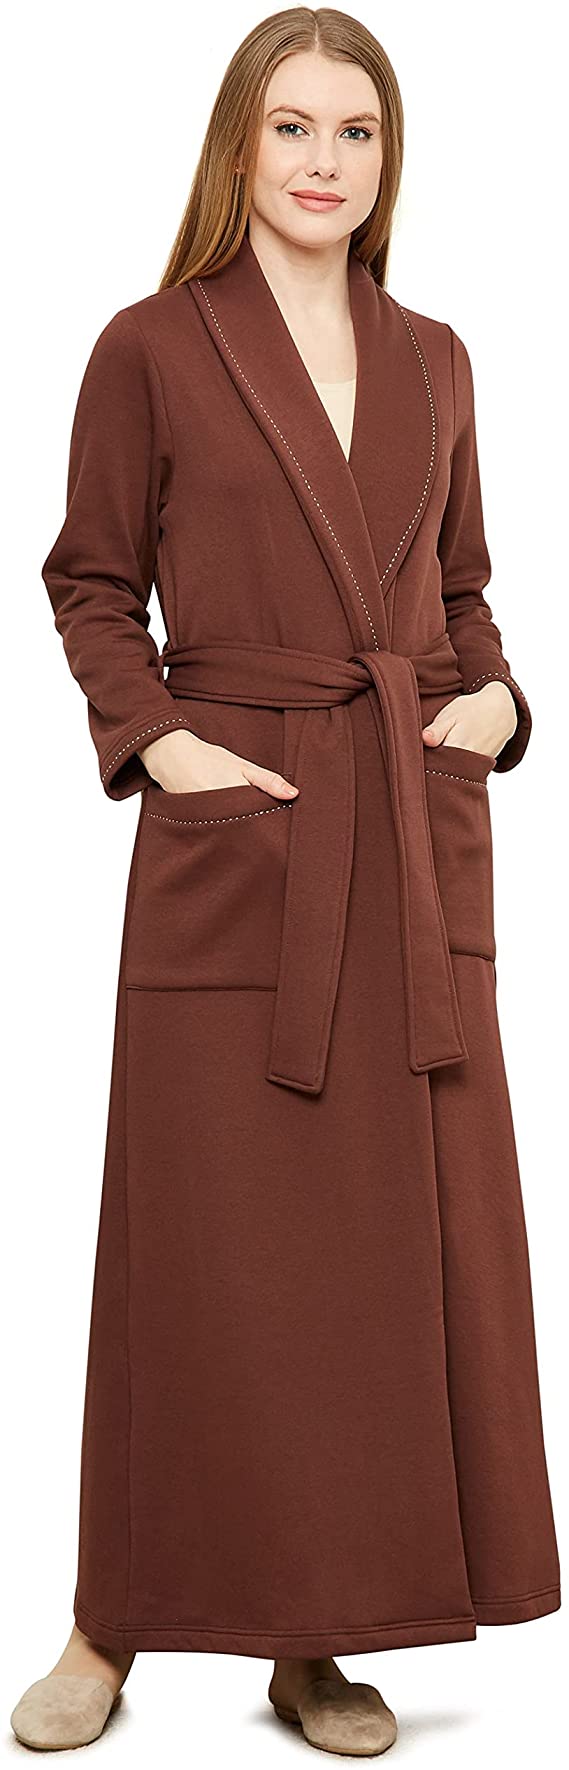 Be Relax - Womens Terry Robe, Long Cotton Wrap Robe, Warm Lounge Robe for Women